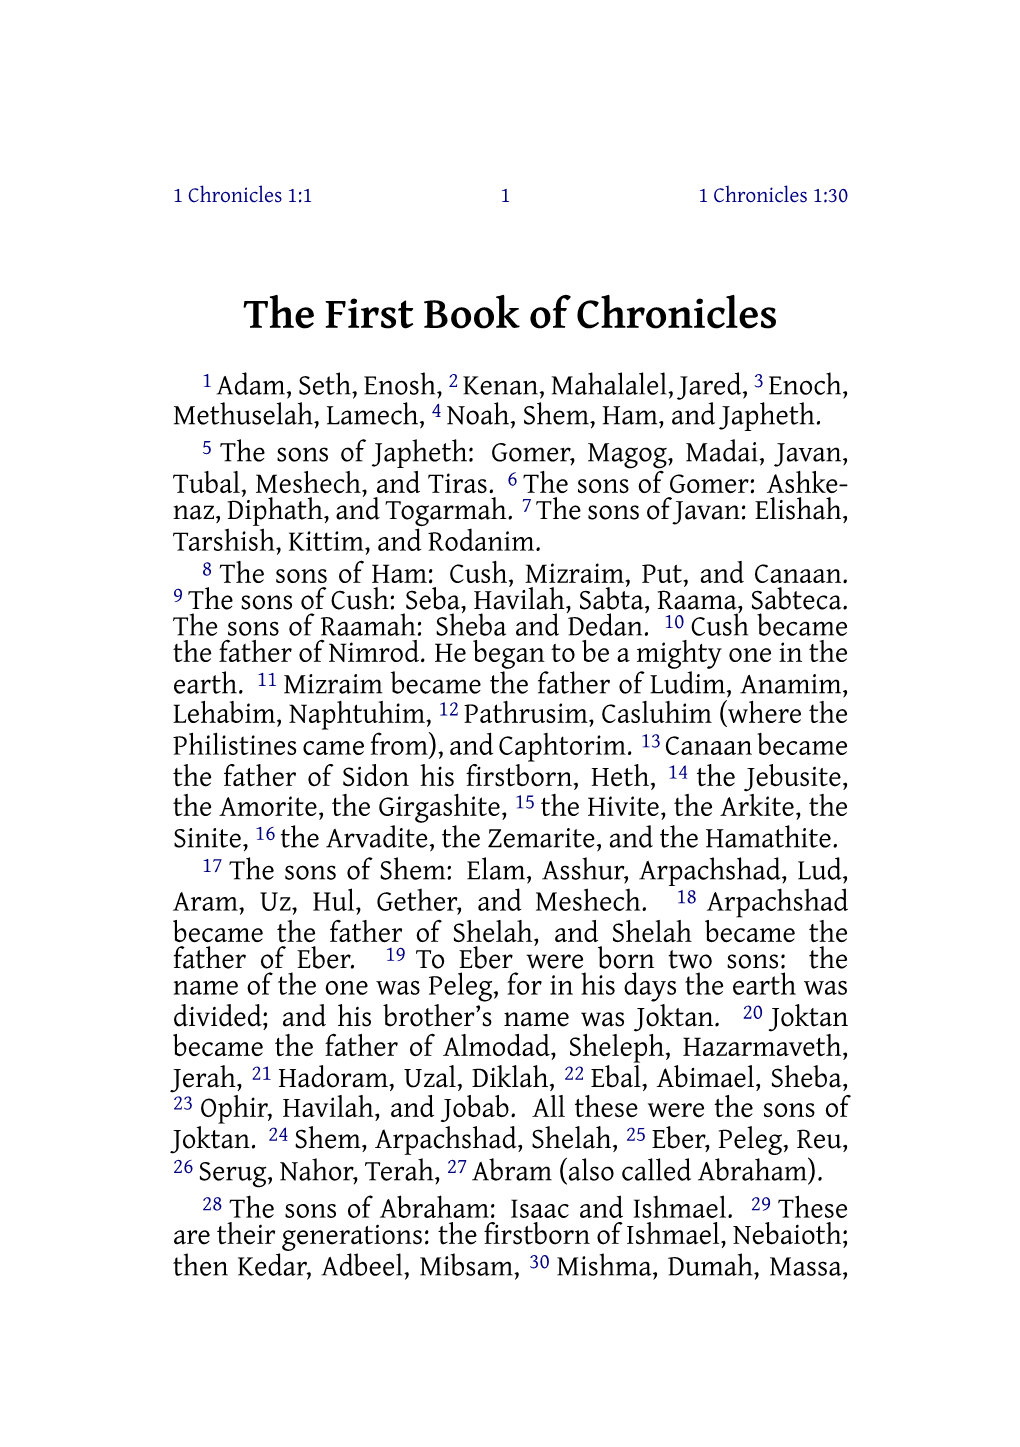 The First Book of Chronicles